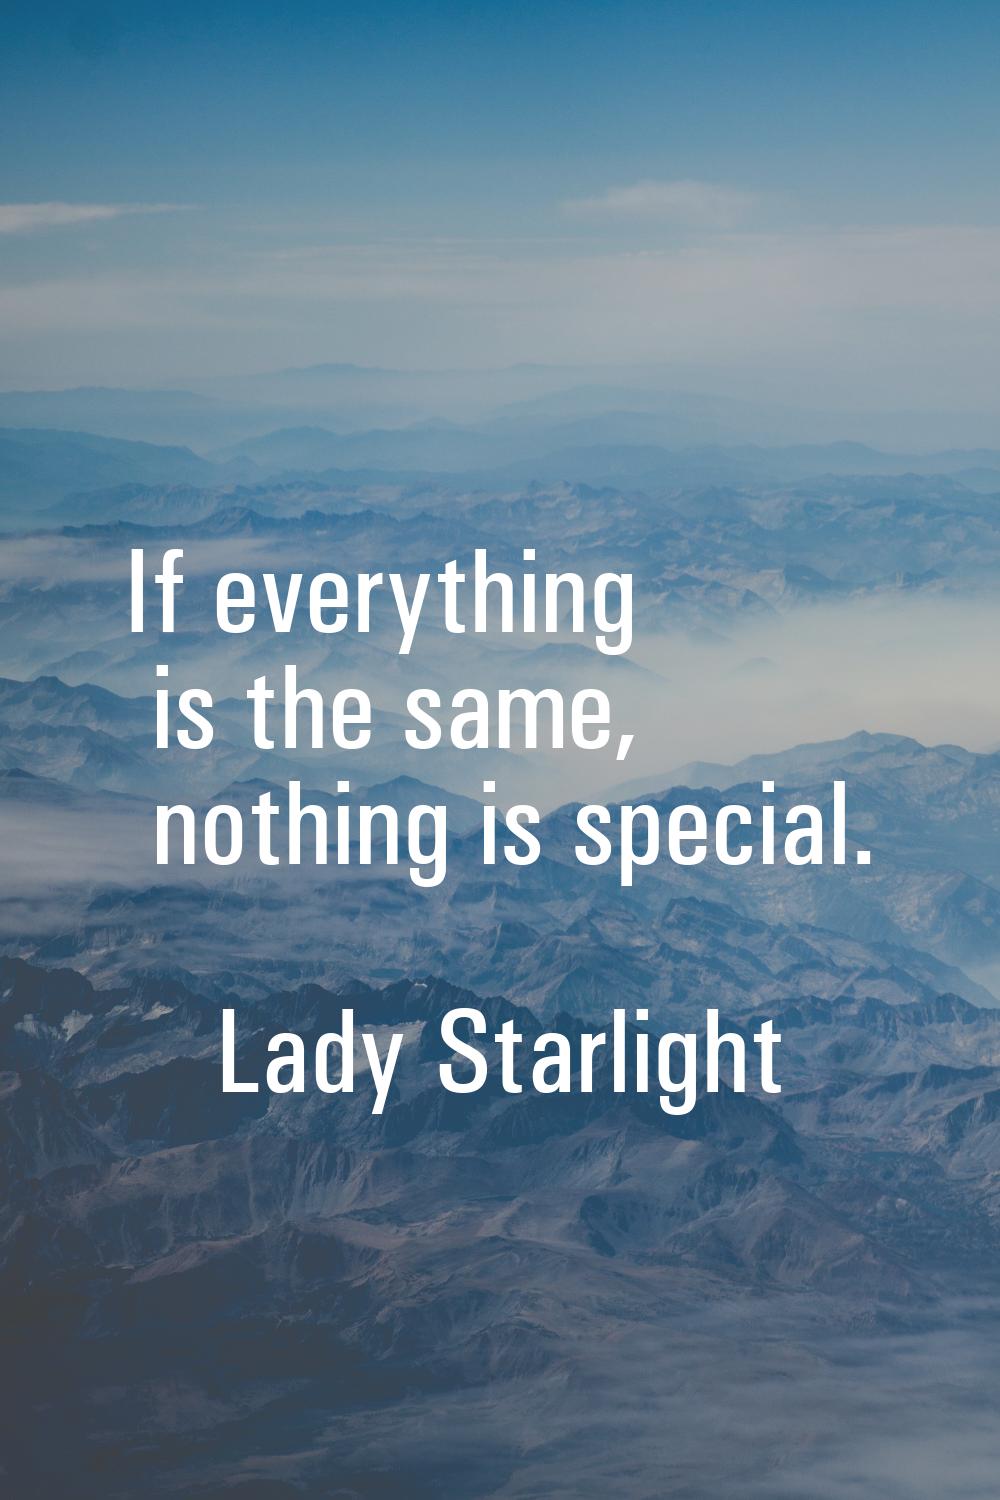 If everything is the same, nothing is special.